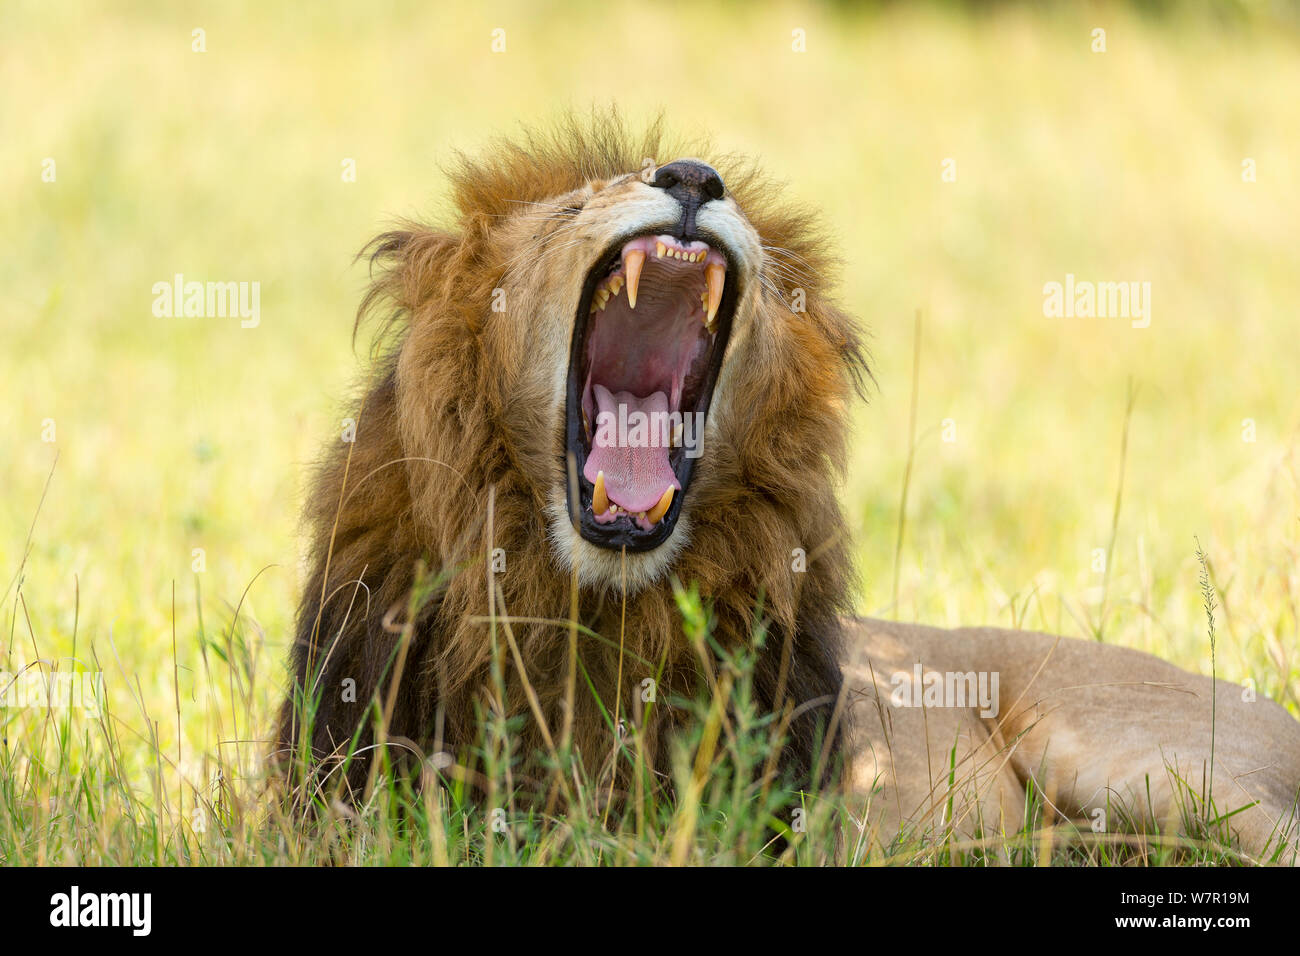 Lion (Panthera leo) male with mouth wide open yawning, Masai-Mara Game Reserve, Kenya. Vulnerable species., Stock Photo